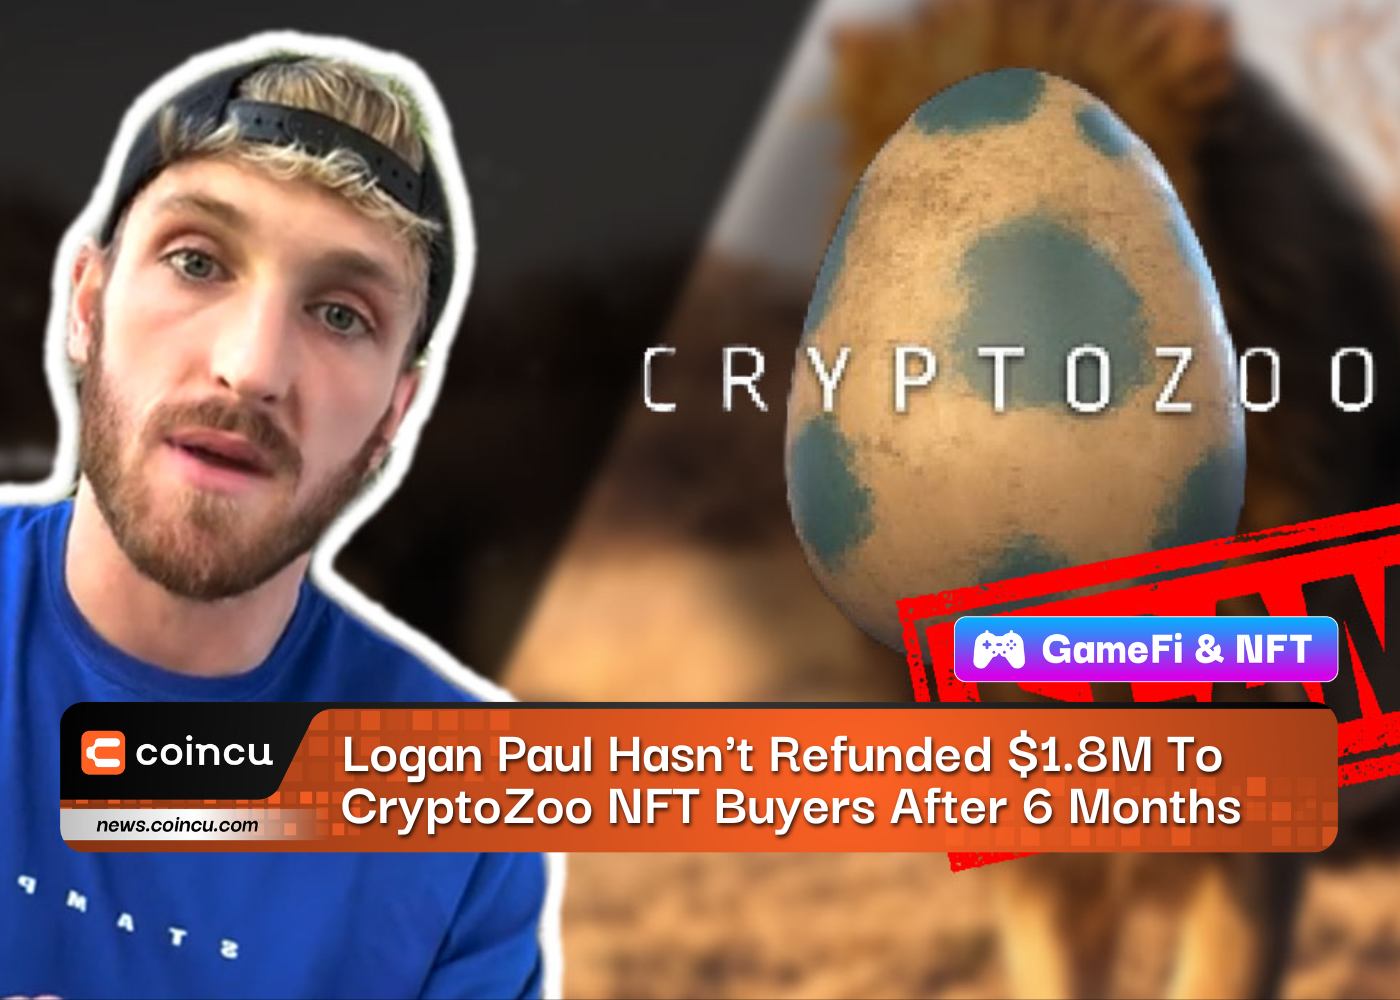 Logan Paul Hasn’t Refunded $1.8M To CryptoZoo Scam NFT Buyers After 6 Months